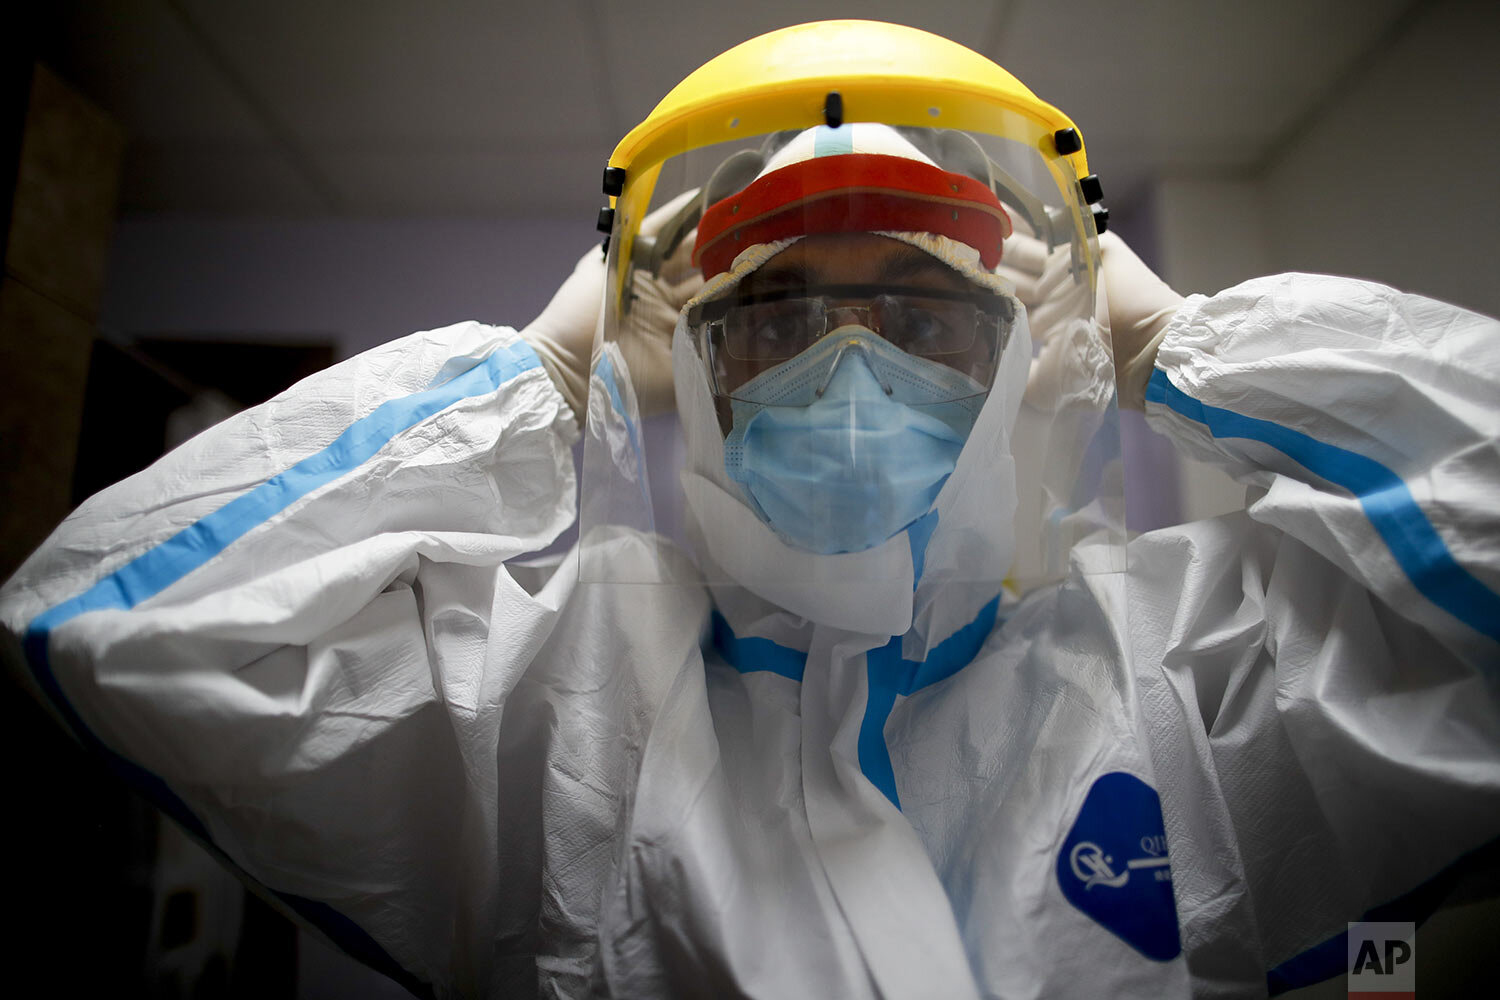  Dr. Matias Norte adjusts his face shield as he dresses in full protective gear at a hospital, one of three he visiting in Buenos Aires, Argentina, Saturday, July 18, 2020. (AP Photo/Natacha Pisarenko) 